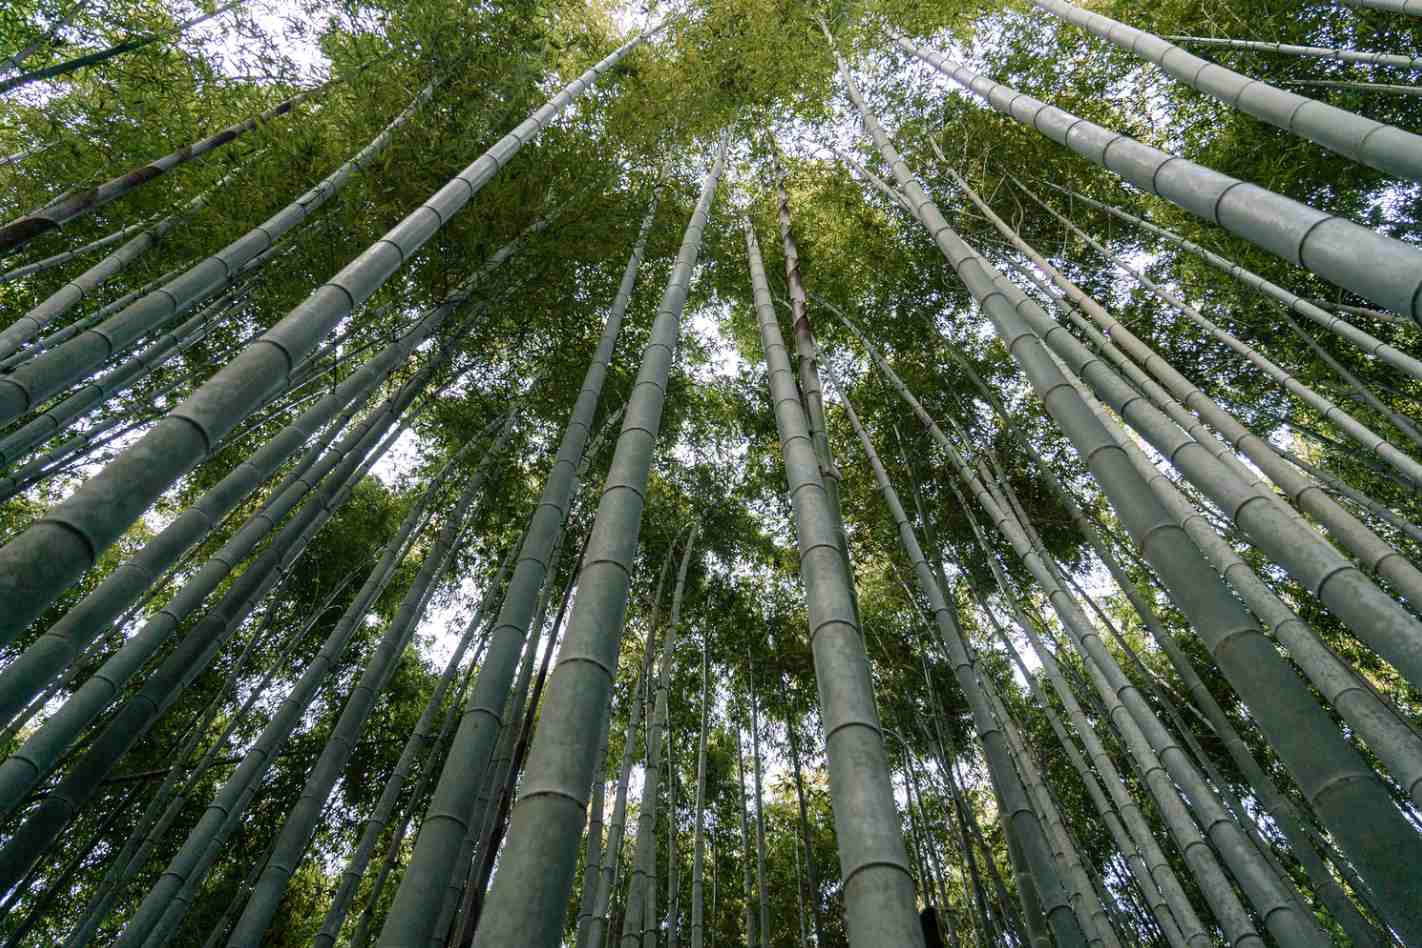 Bamboo for ecology